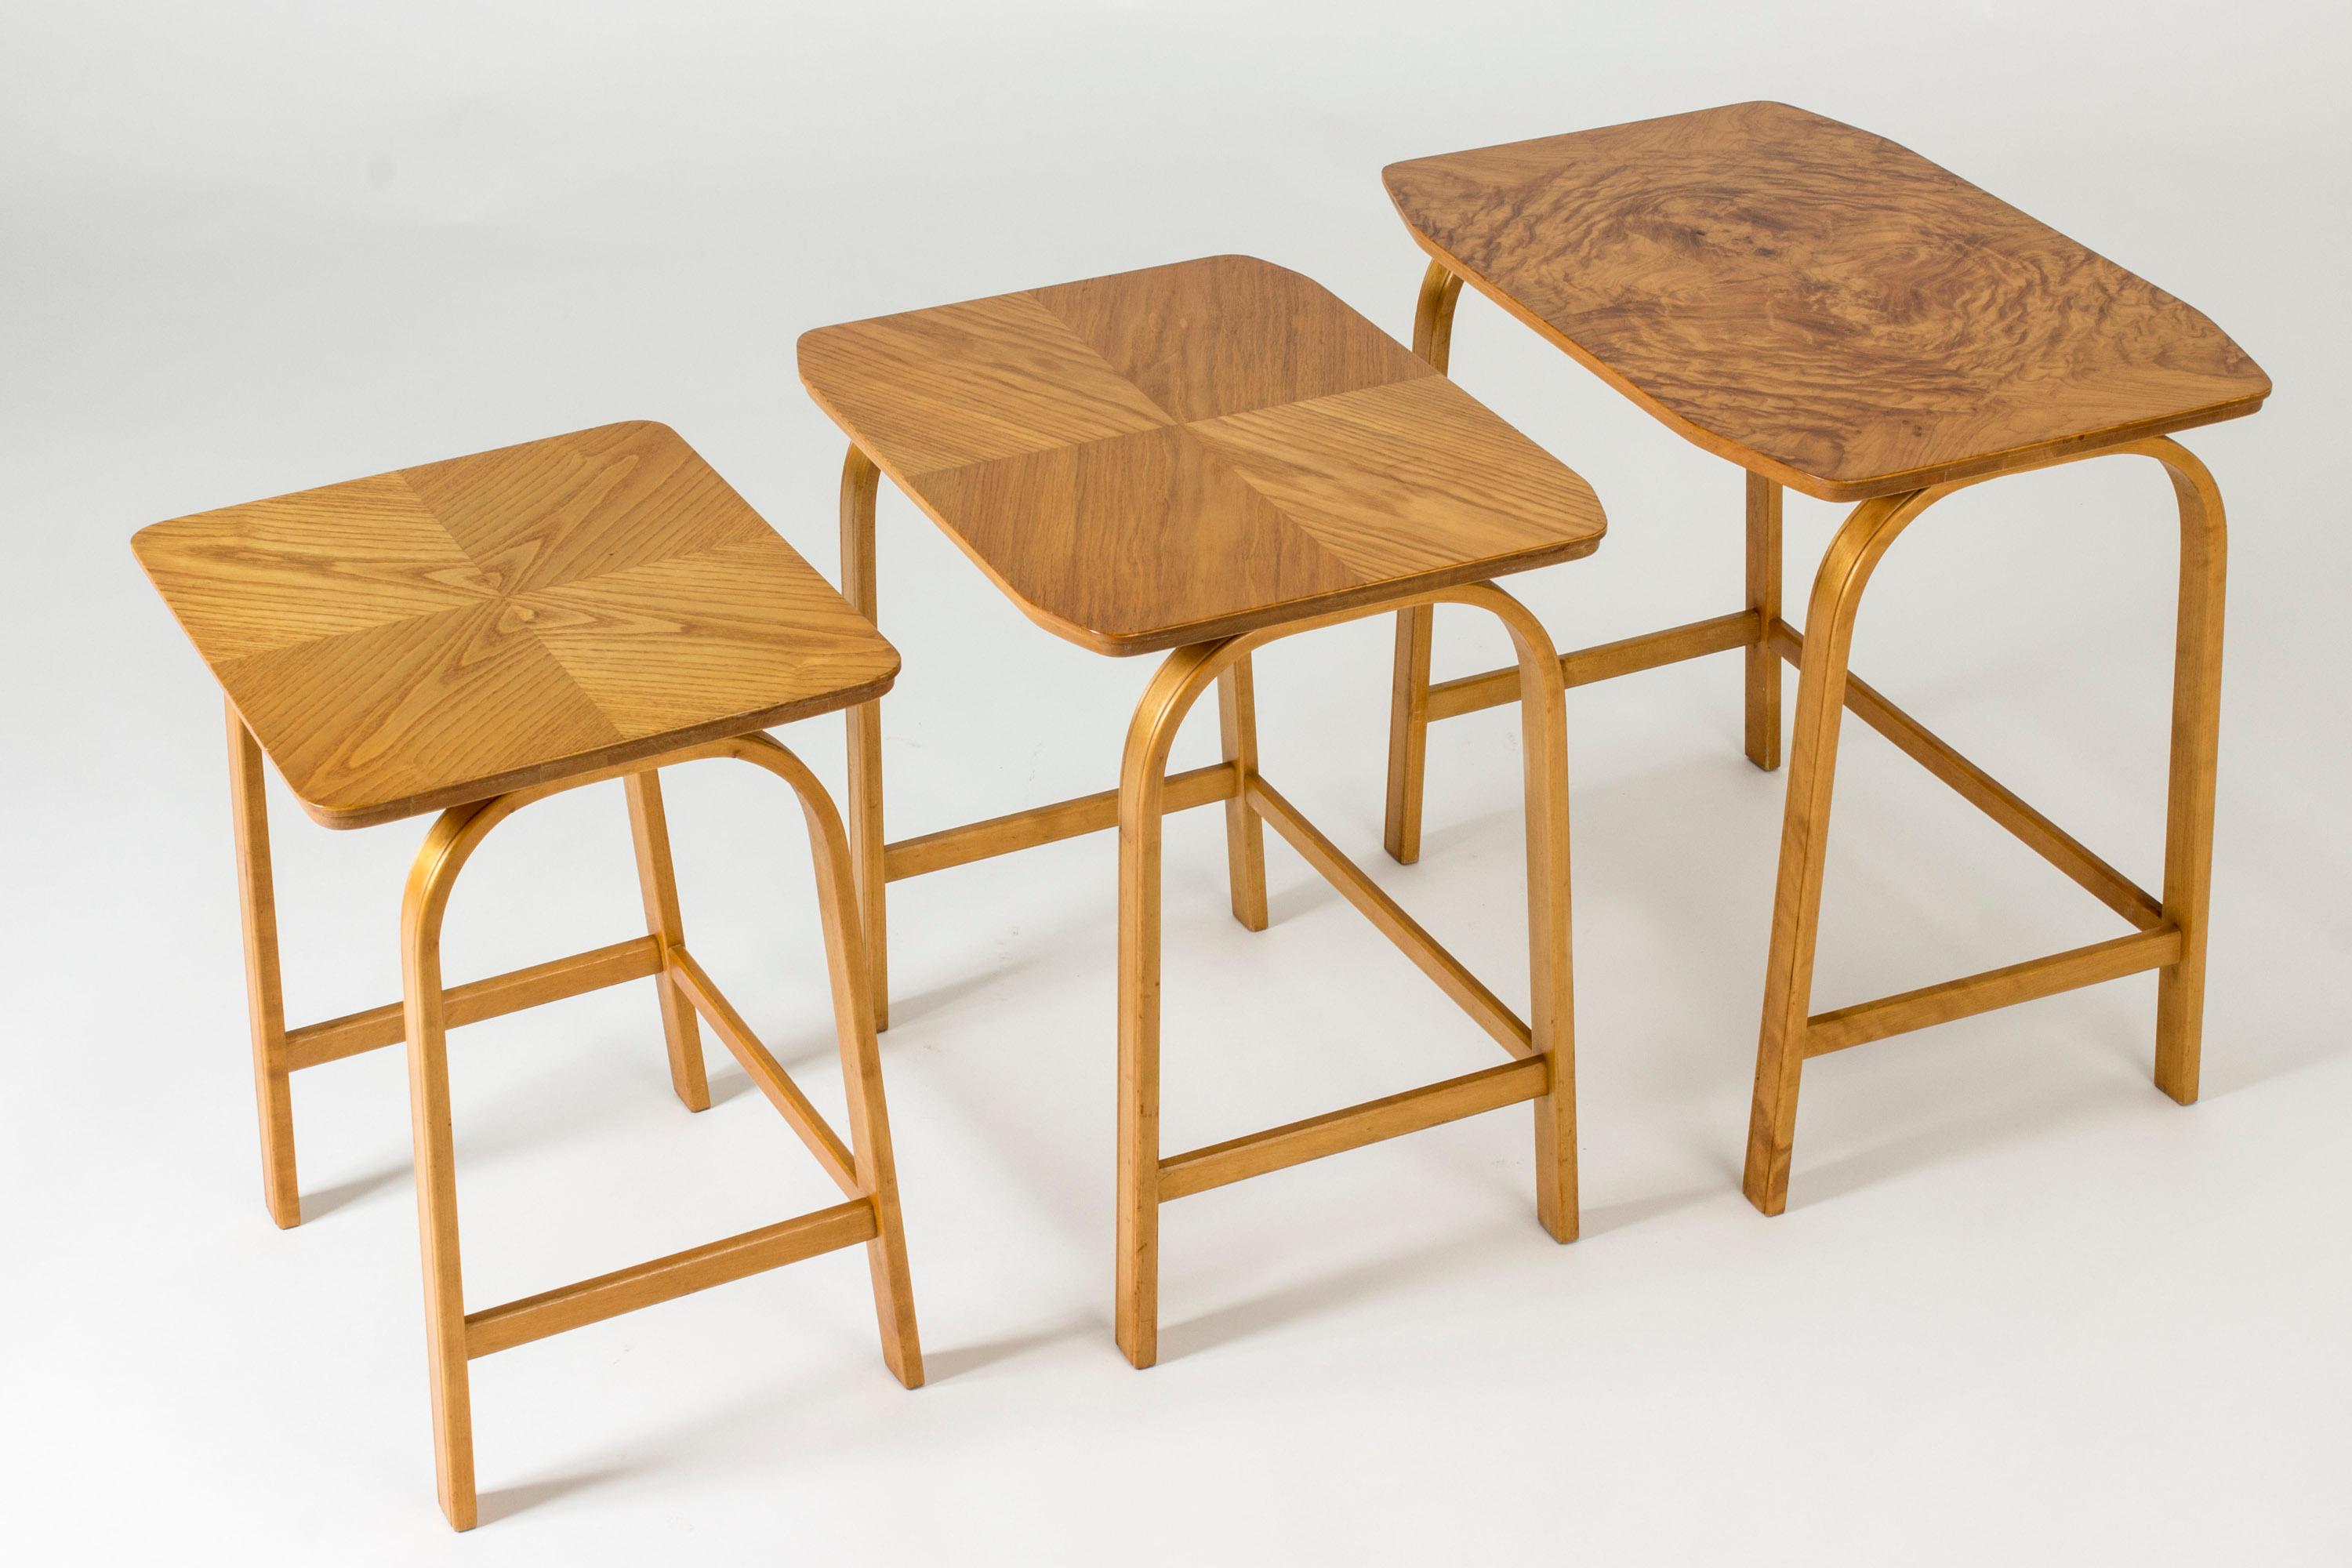 Nesting table with three tables in different sizes by Axel Larsson. Beautiful, clean silhouette and a warm birch color. Each table top has a different kind of look, with root veneer on the largest and decoratively laid wood on the smaller ones.